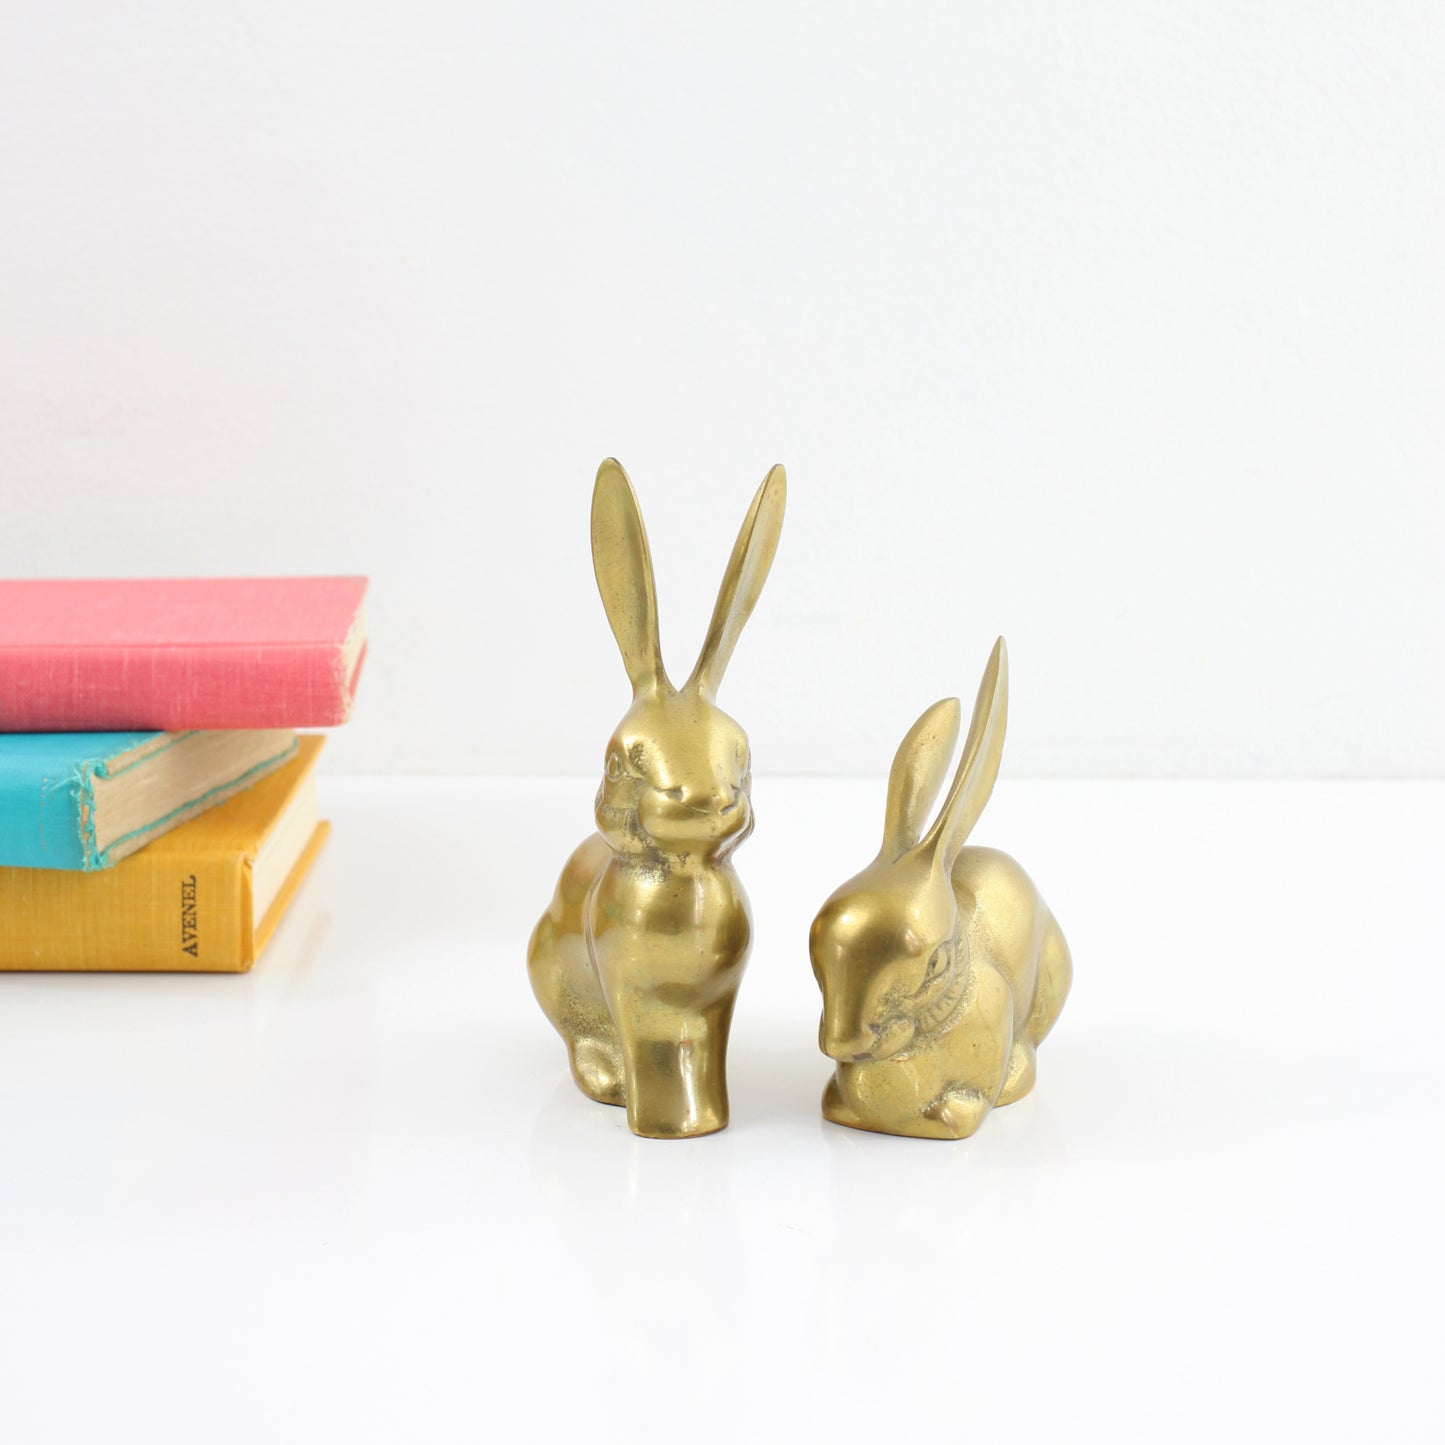 SOLD - Vintage Pair of Brass Rabbits